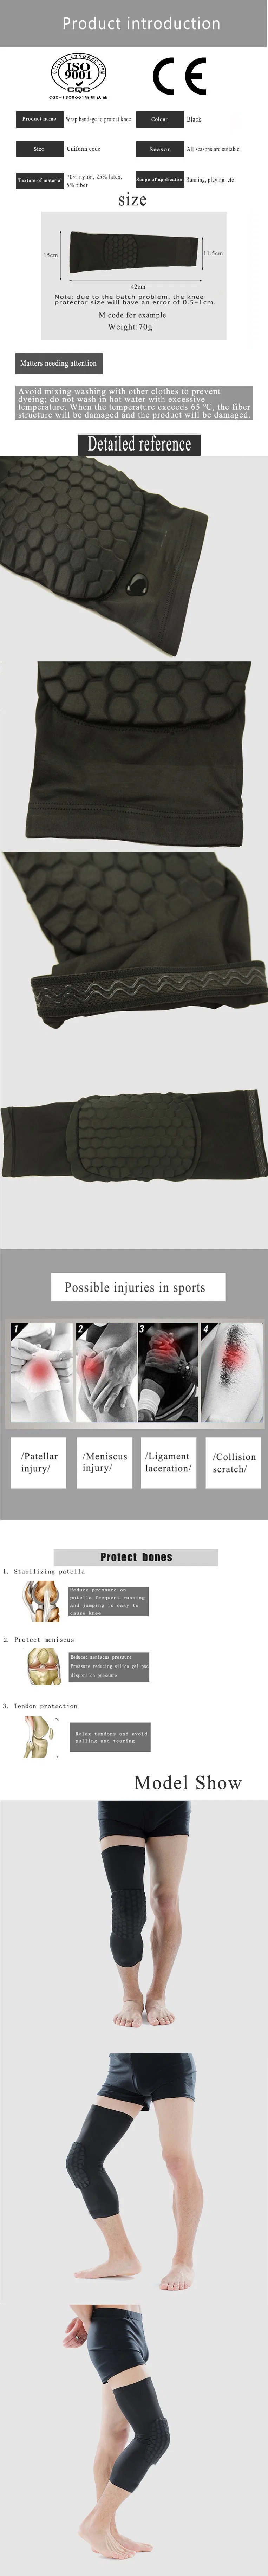 Basketball Anti Slip Honeycomb Knee Protection Lengthening Leg and Knee Compression Cushion Cover